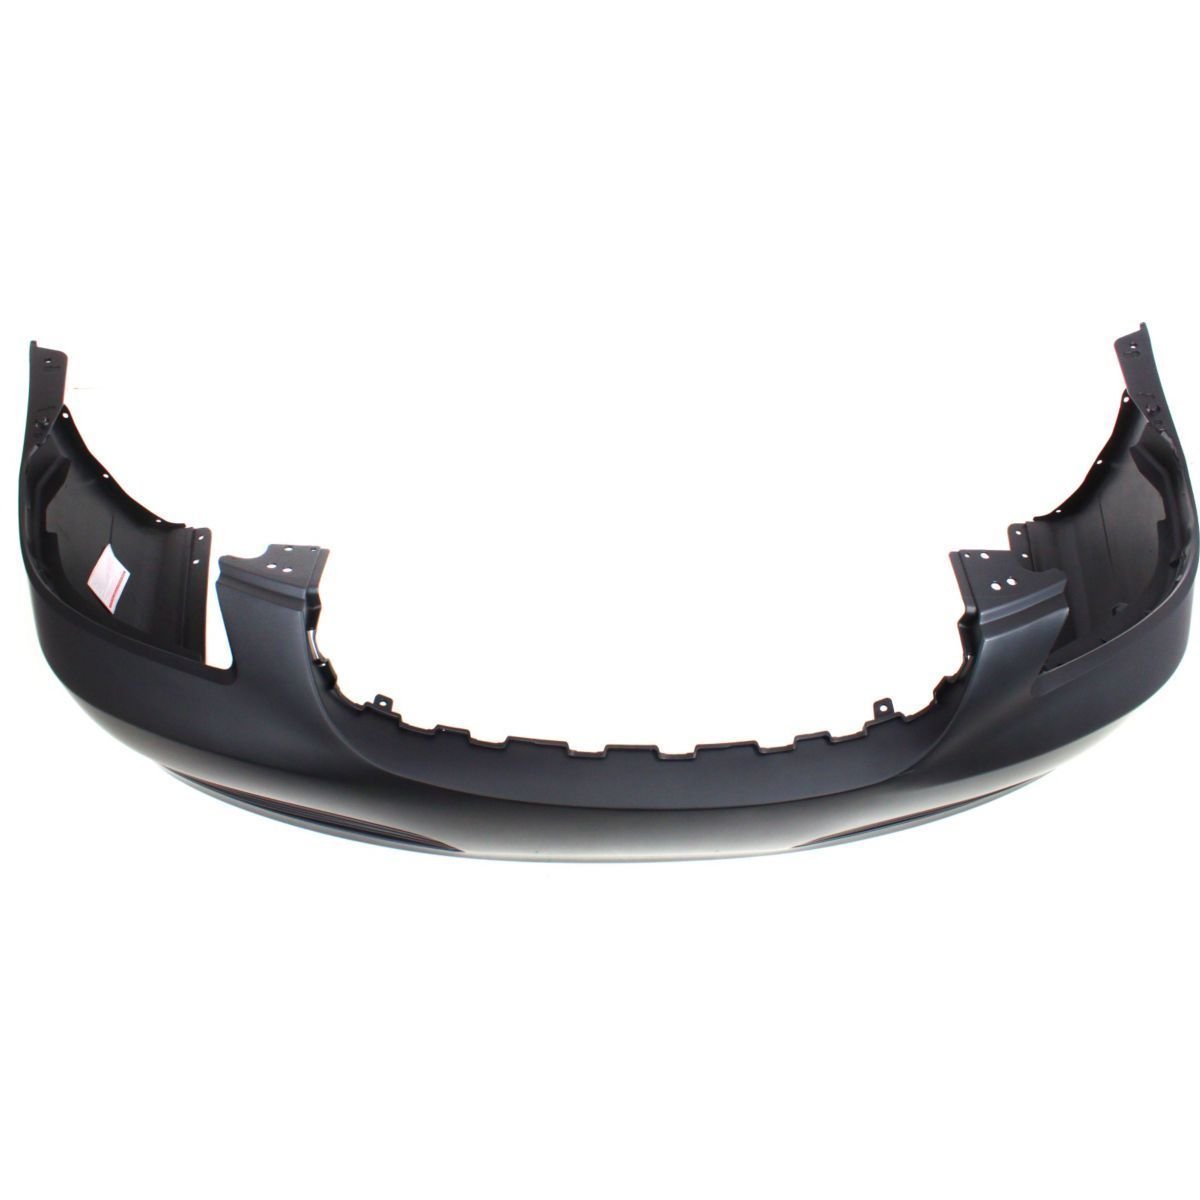 Buick Lucerne 2006 - 2011 Front Bumper Cover 06 - 11 GM1000822 - Bumper-King